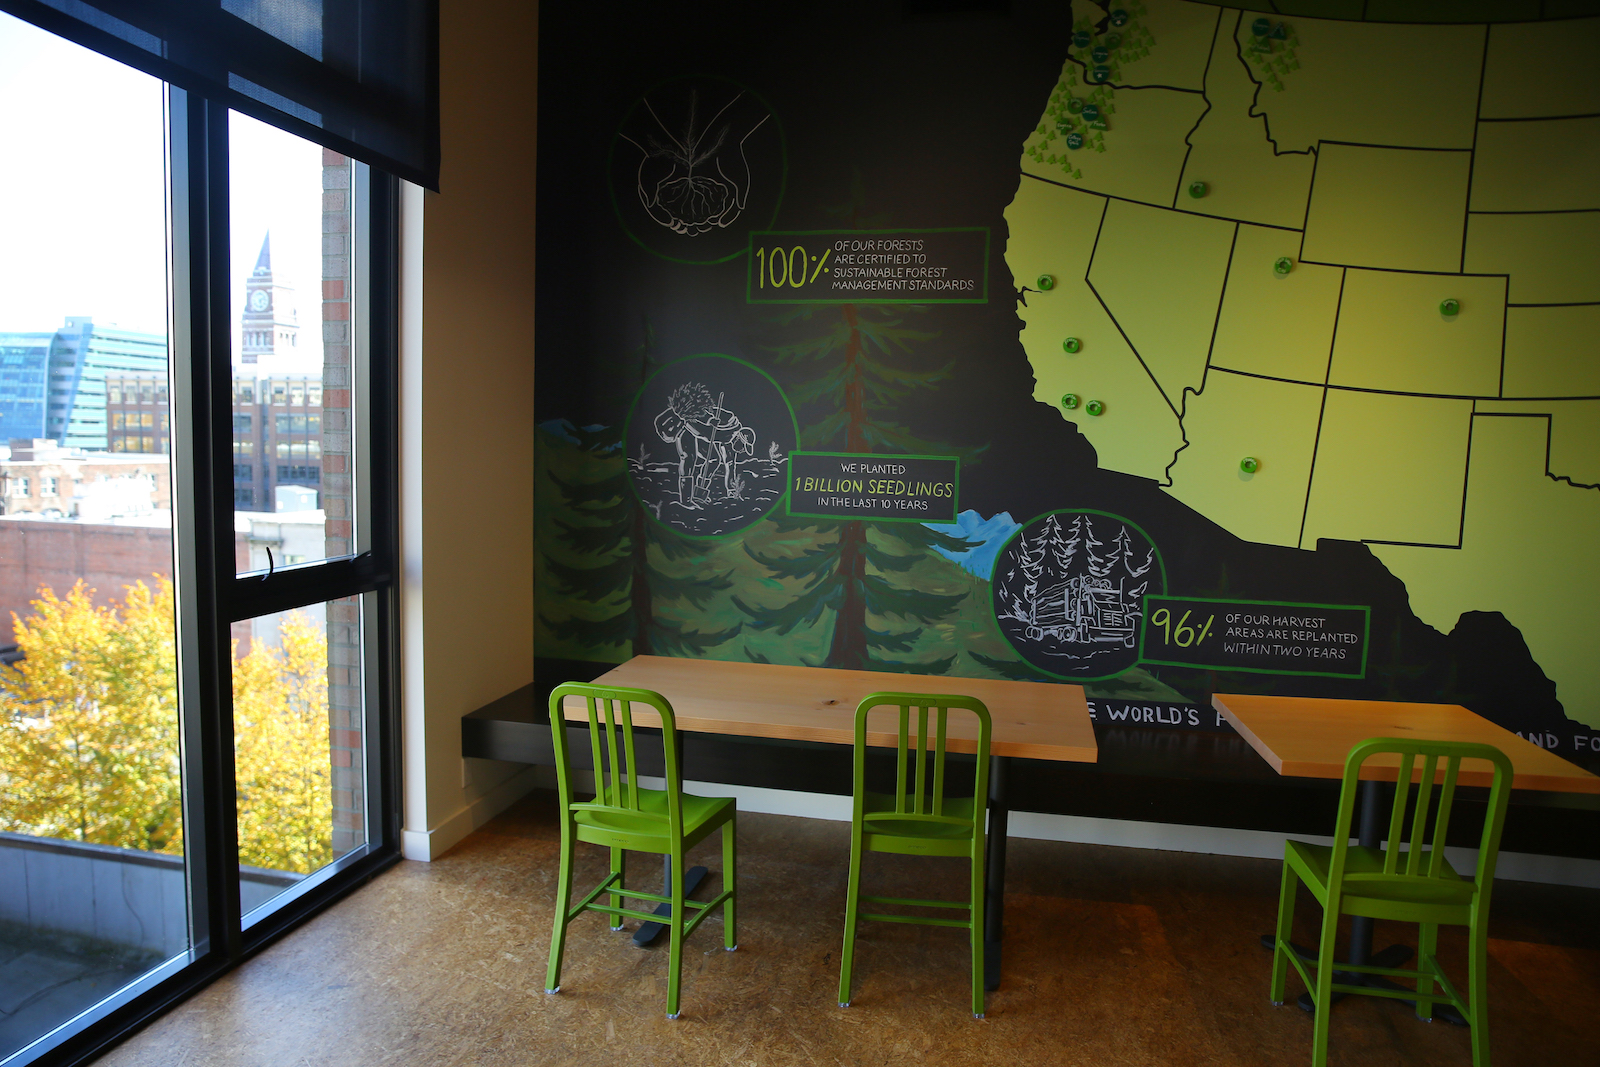 green wood chairs in front of chalkboard in office setting